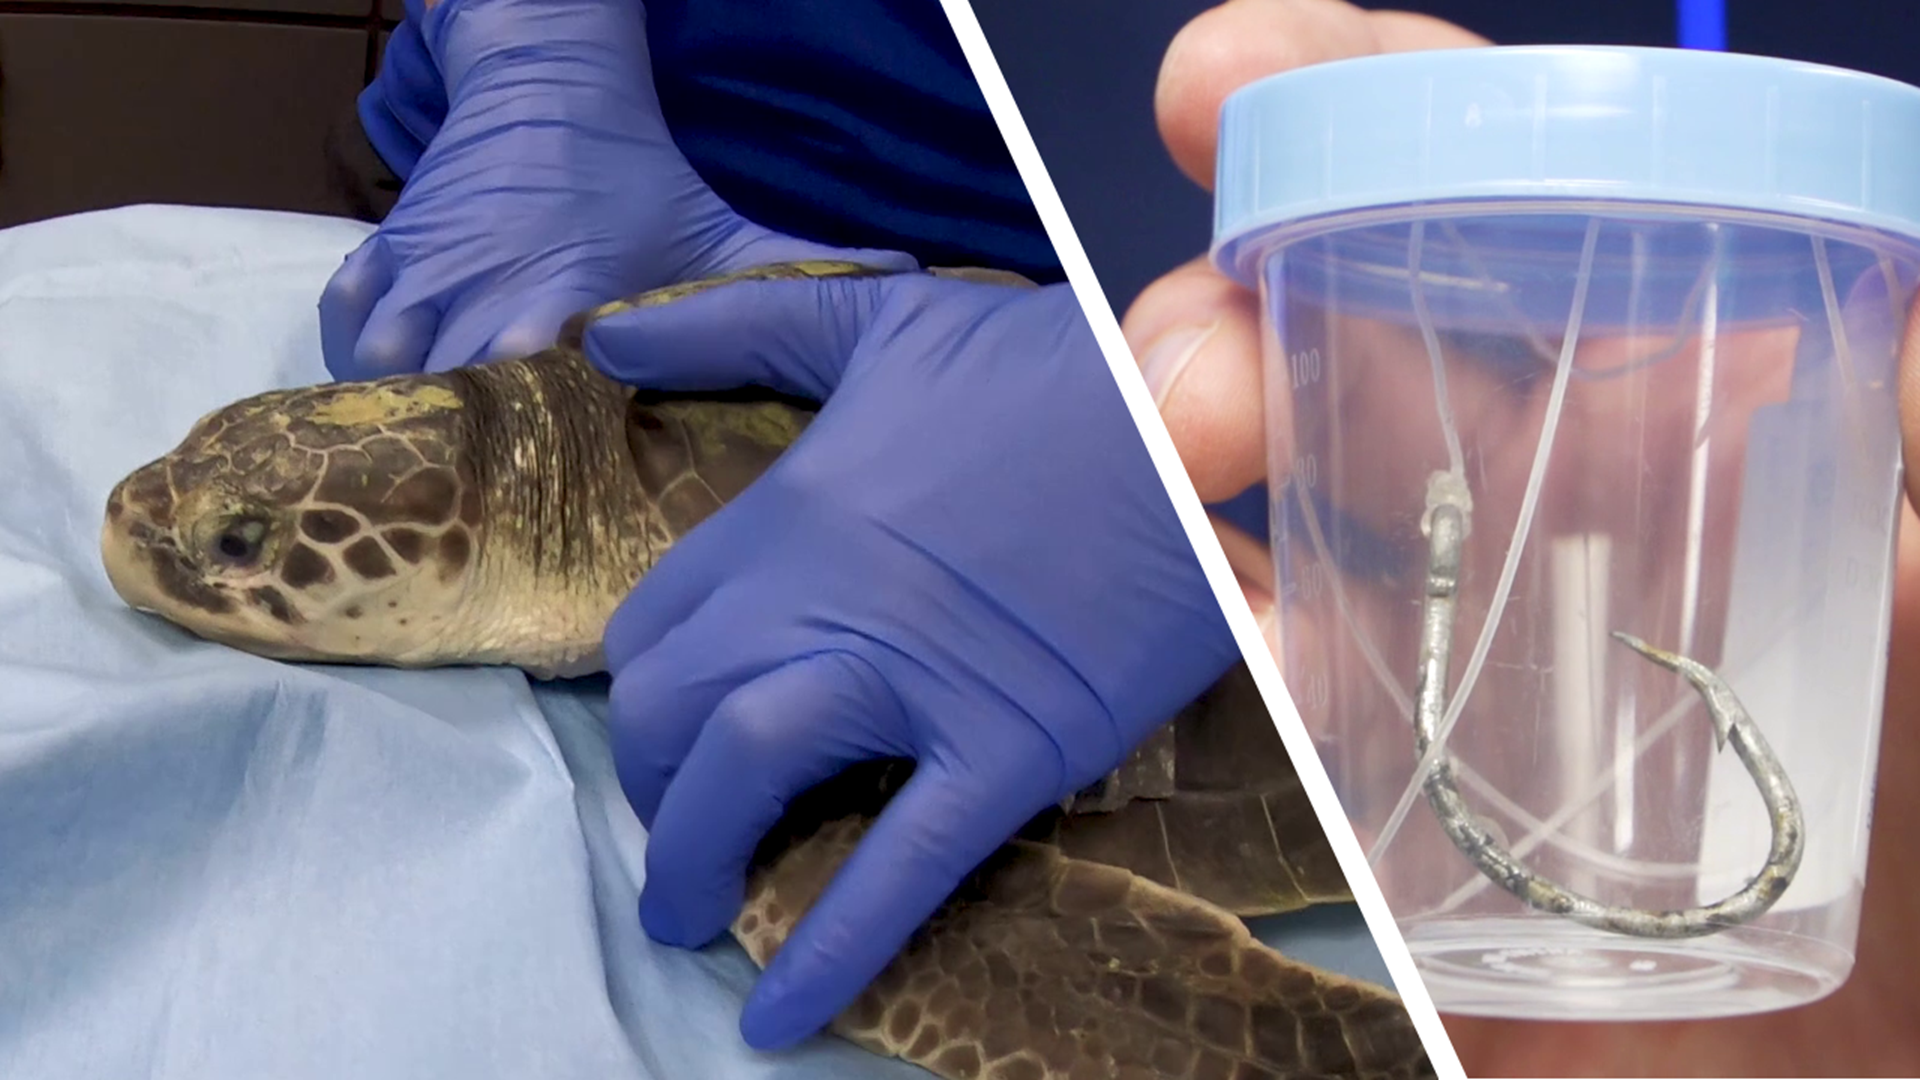 "Heath" the sea turtle is resting comfortably after an unpleasant encounter with a fishing hook. Video: Clearwater Marine Aquarium